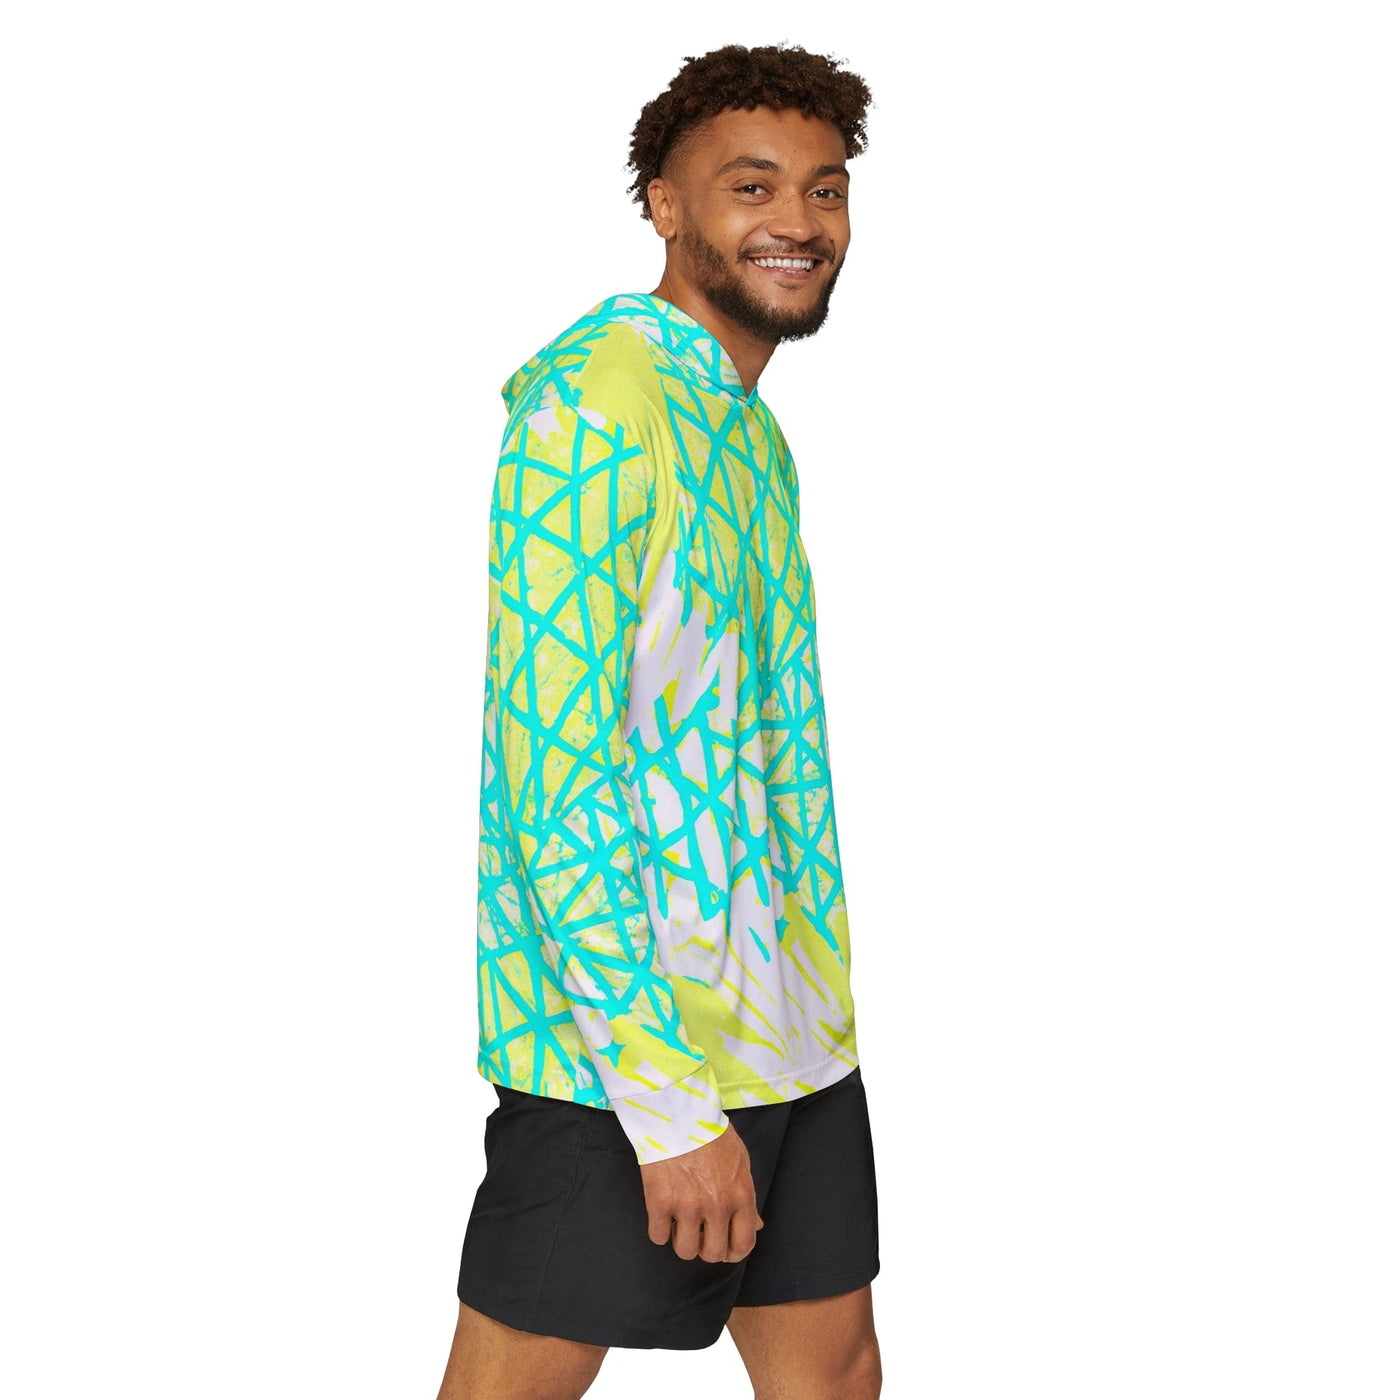 Mens Sports Graphic Hoodie Cyan Blue Lime Green And White Pattern - All Over